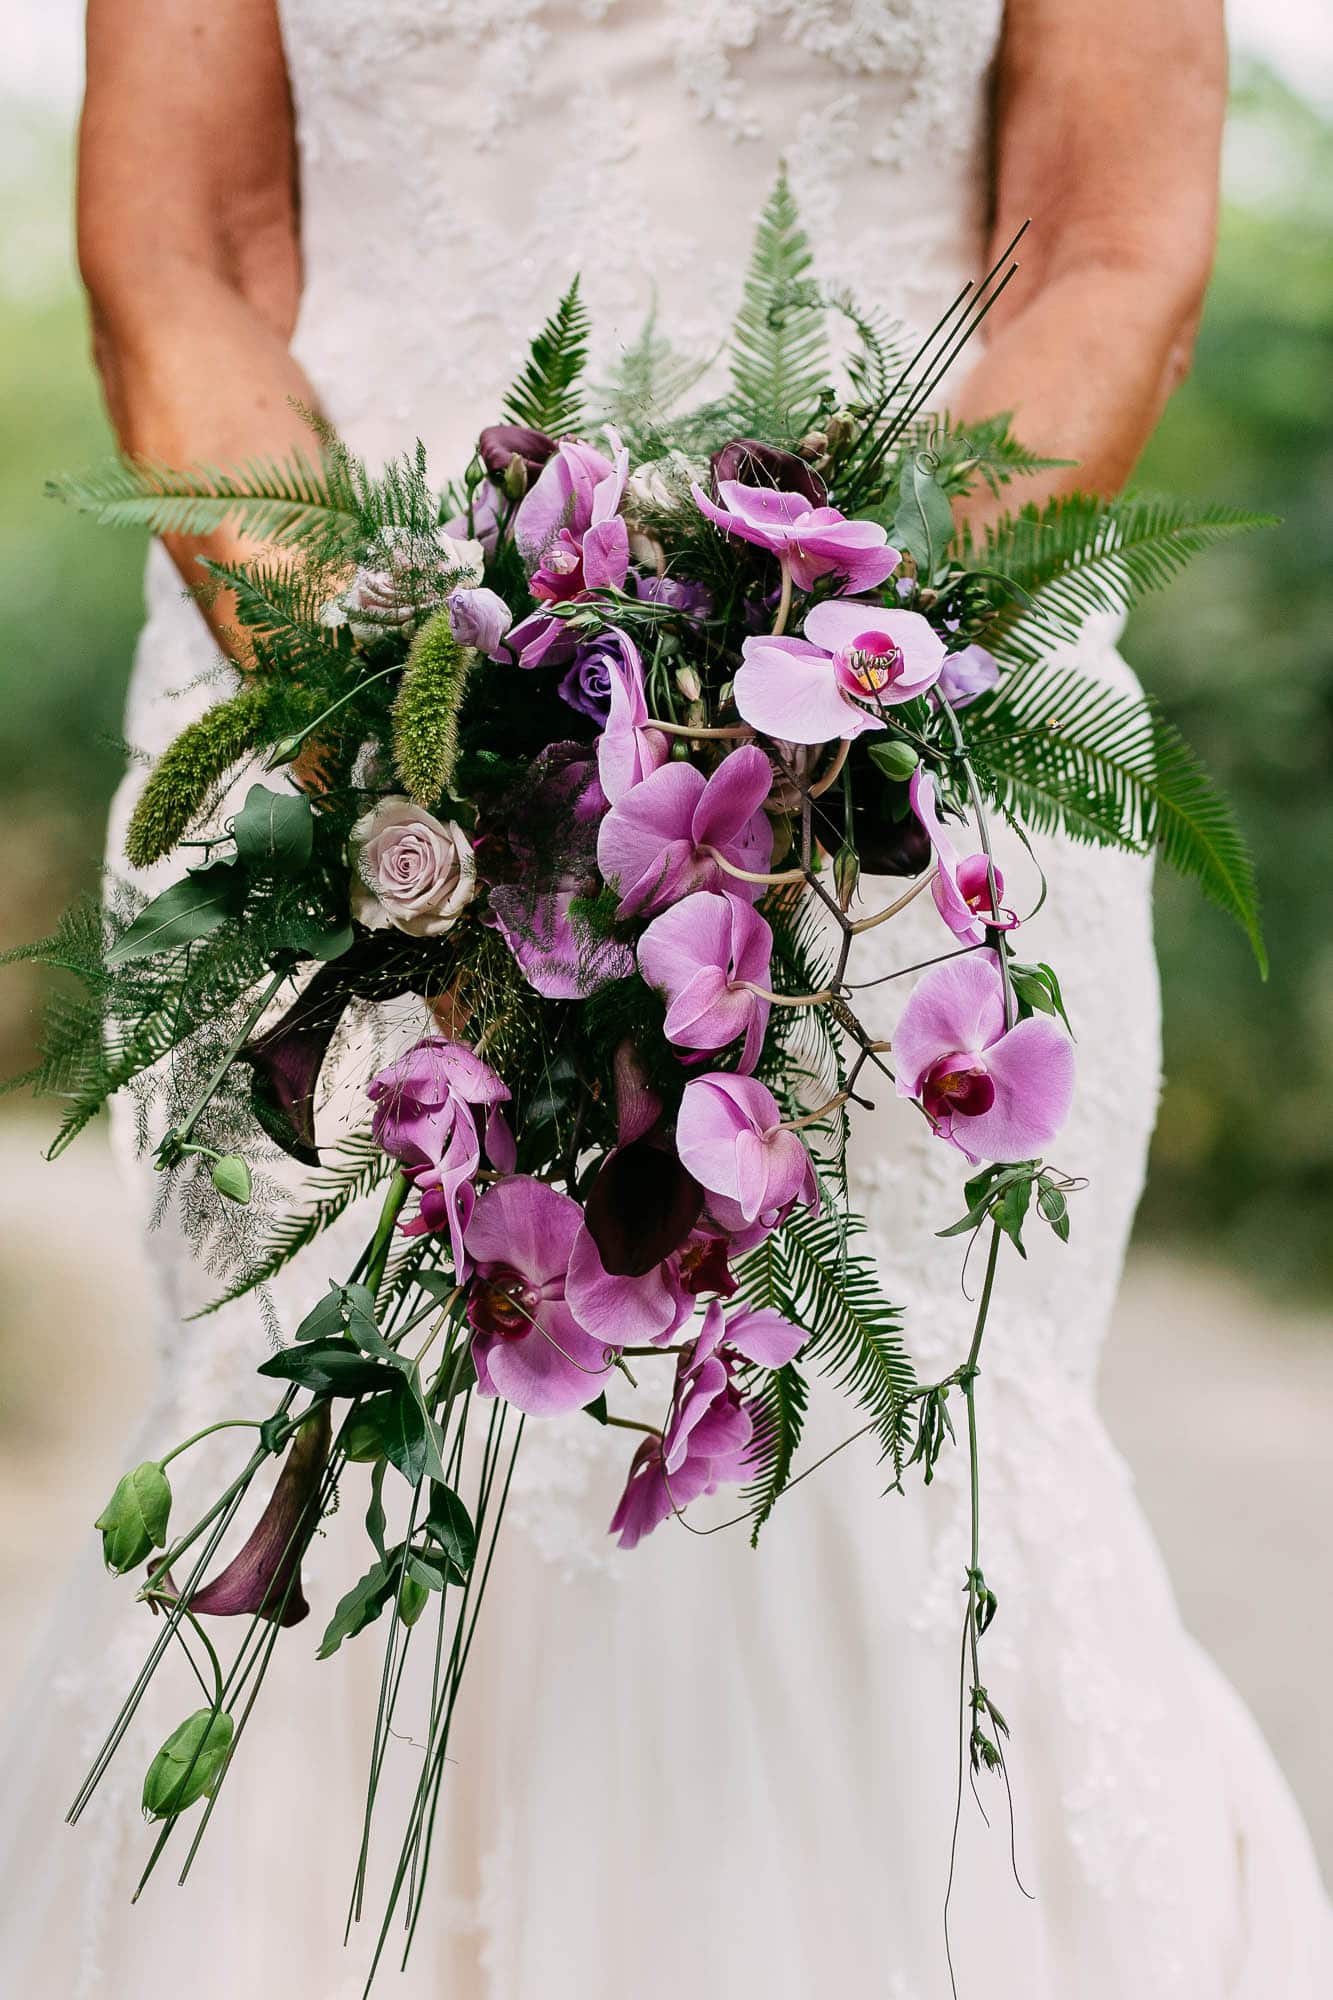 A bride holds a wedding bouquet of purple orchids and ferns.